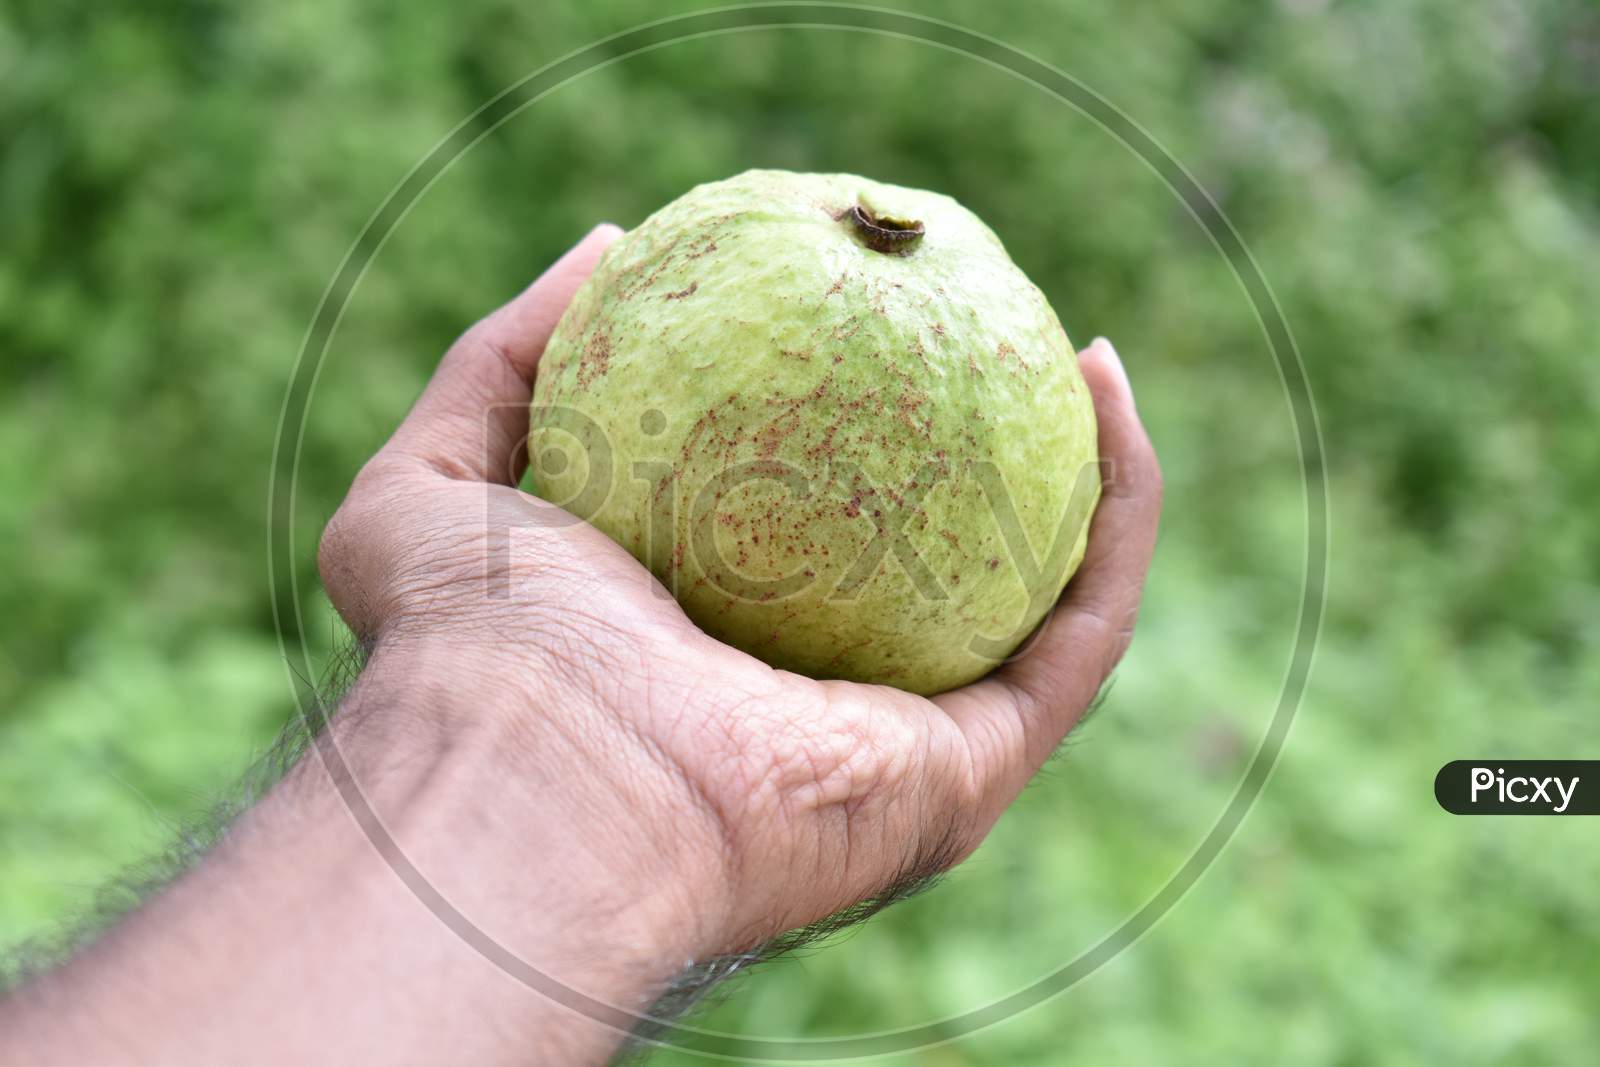 Hand of a boy holding guava fruit